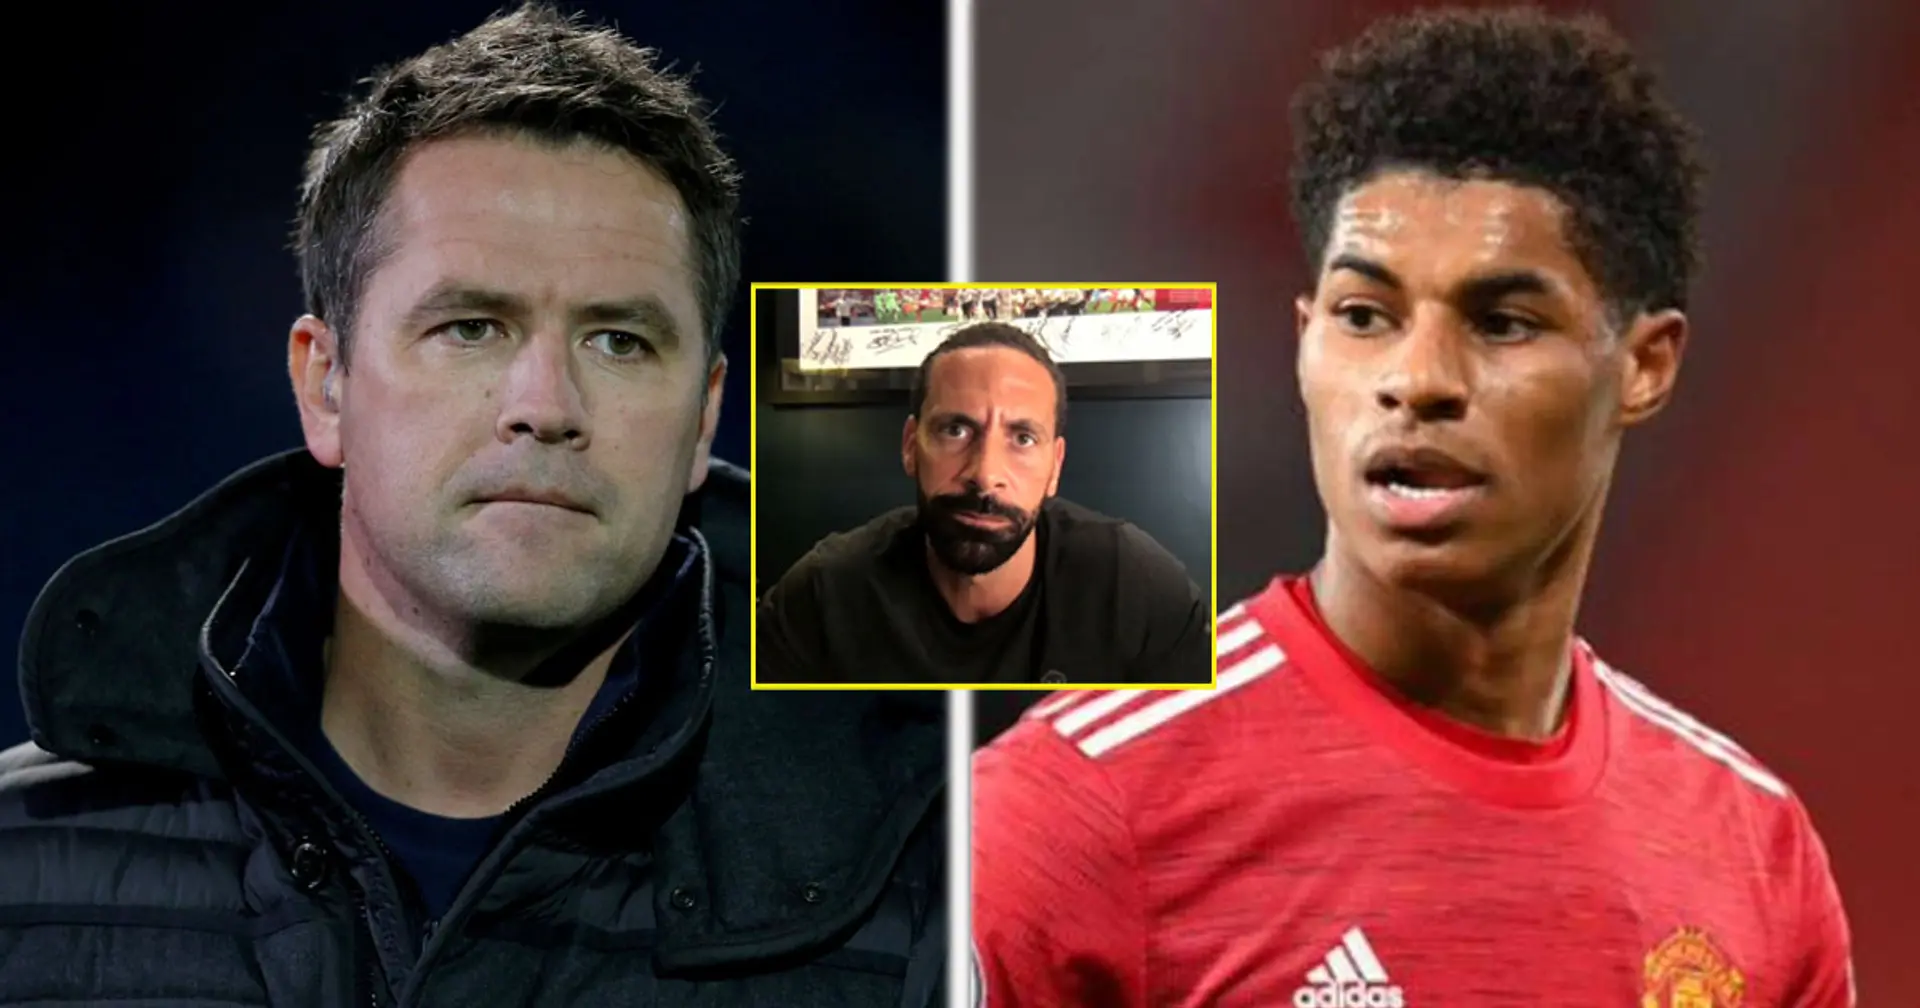 'Have a coffee with him': Ferdinand uses surprising Michael Owen example in injury advice to Rashford